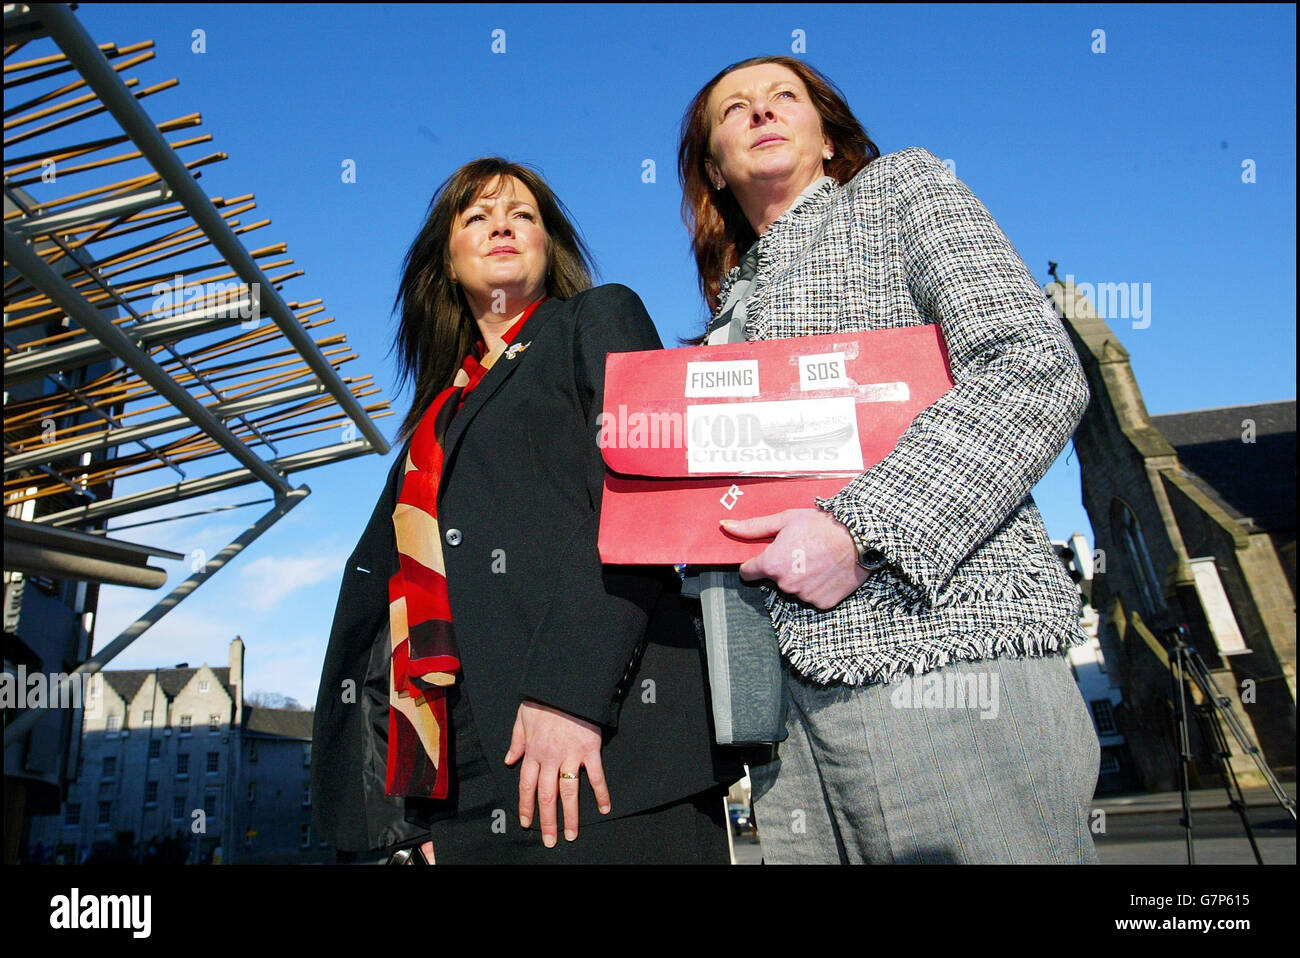 Carol MacDonald (left) and Morag Ritchie on their way to the Petitions Committee regarding the cod catch quotas. Stock Photo